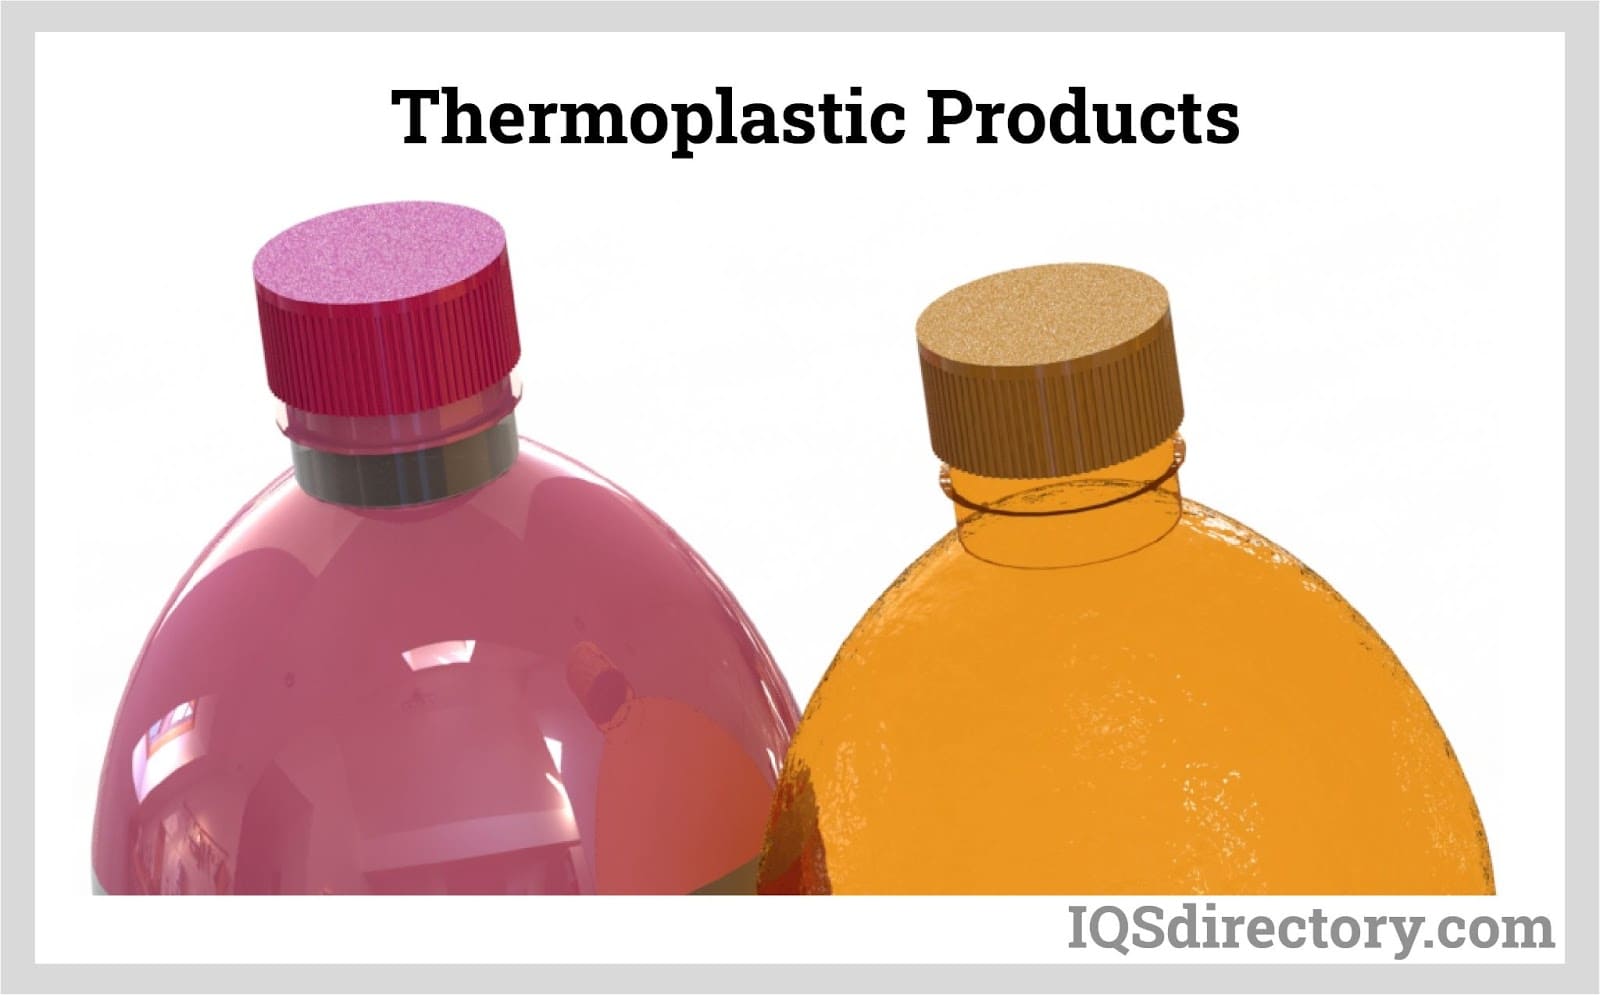 Thermoplastic Products